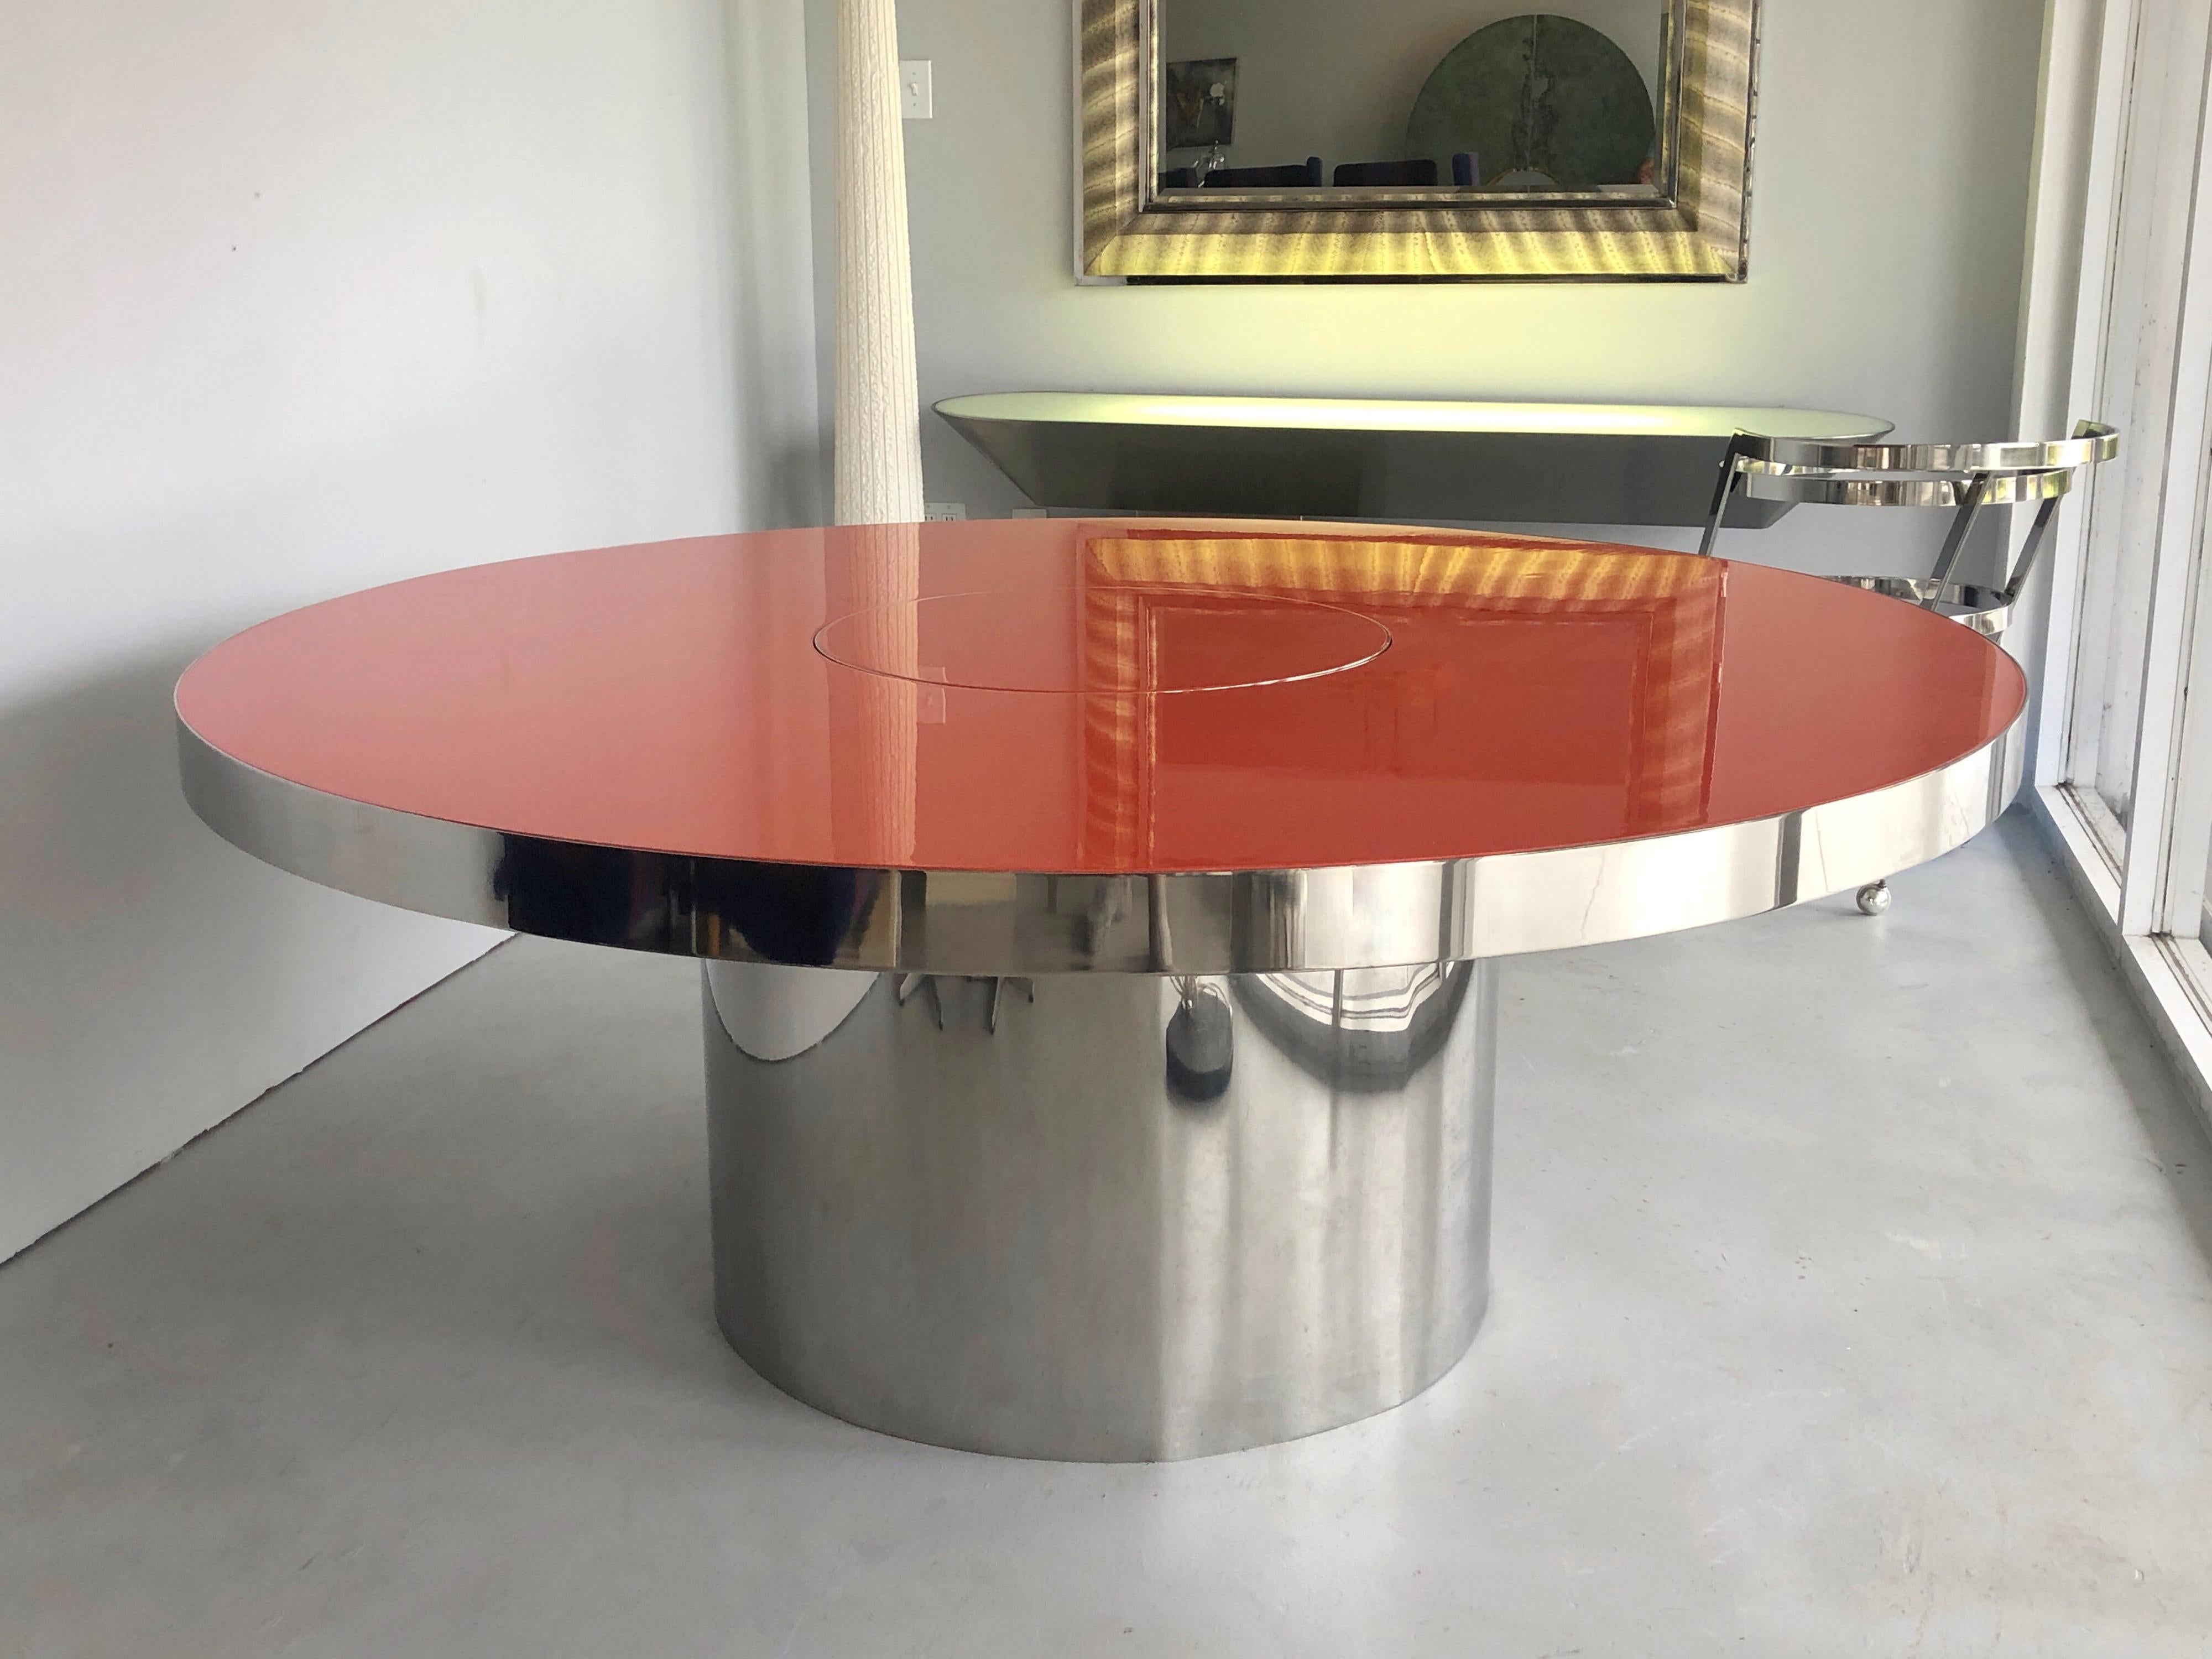 A round dining table. Stainless steel cylindrical base, the top is polished lacquer with a stainless steel border. The small center circle has also a stainless edge and swivels in both directions. Signed with metal tag on verso.